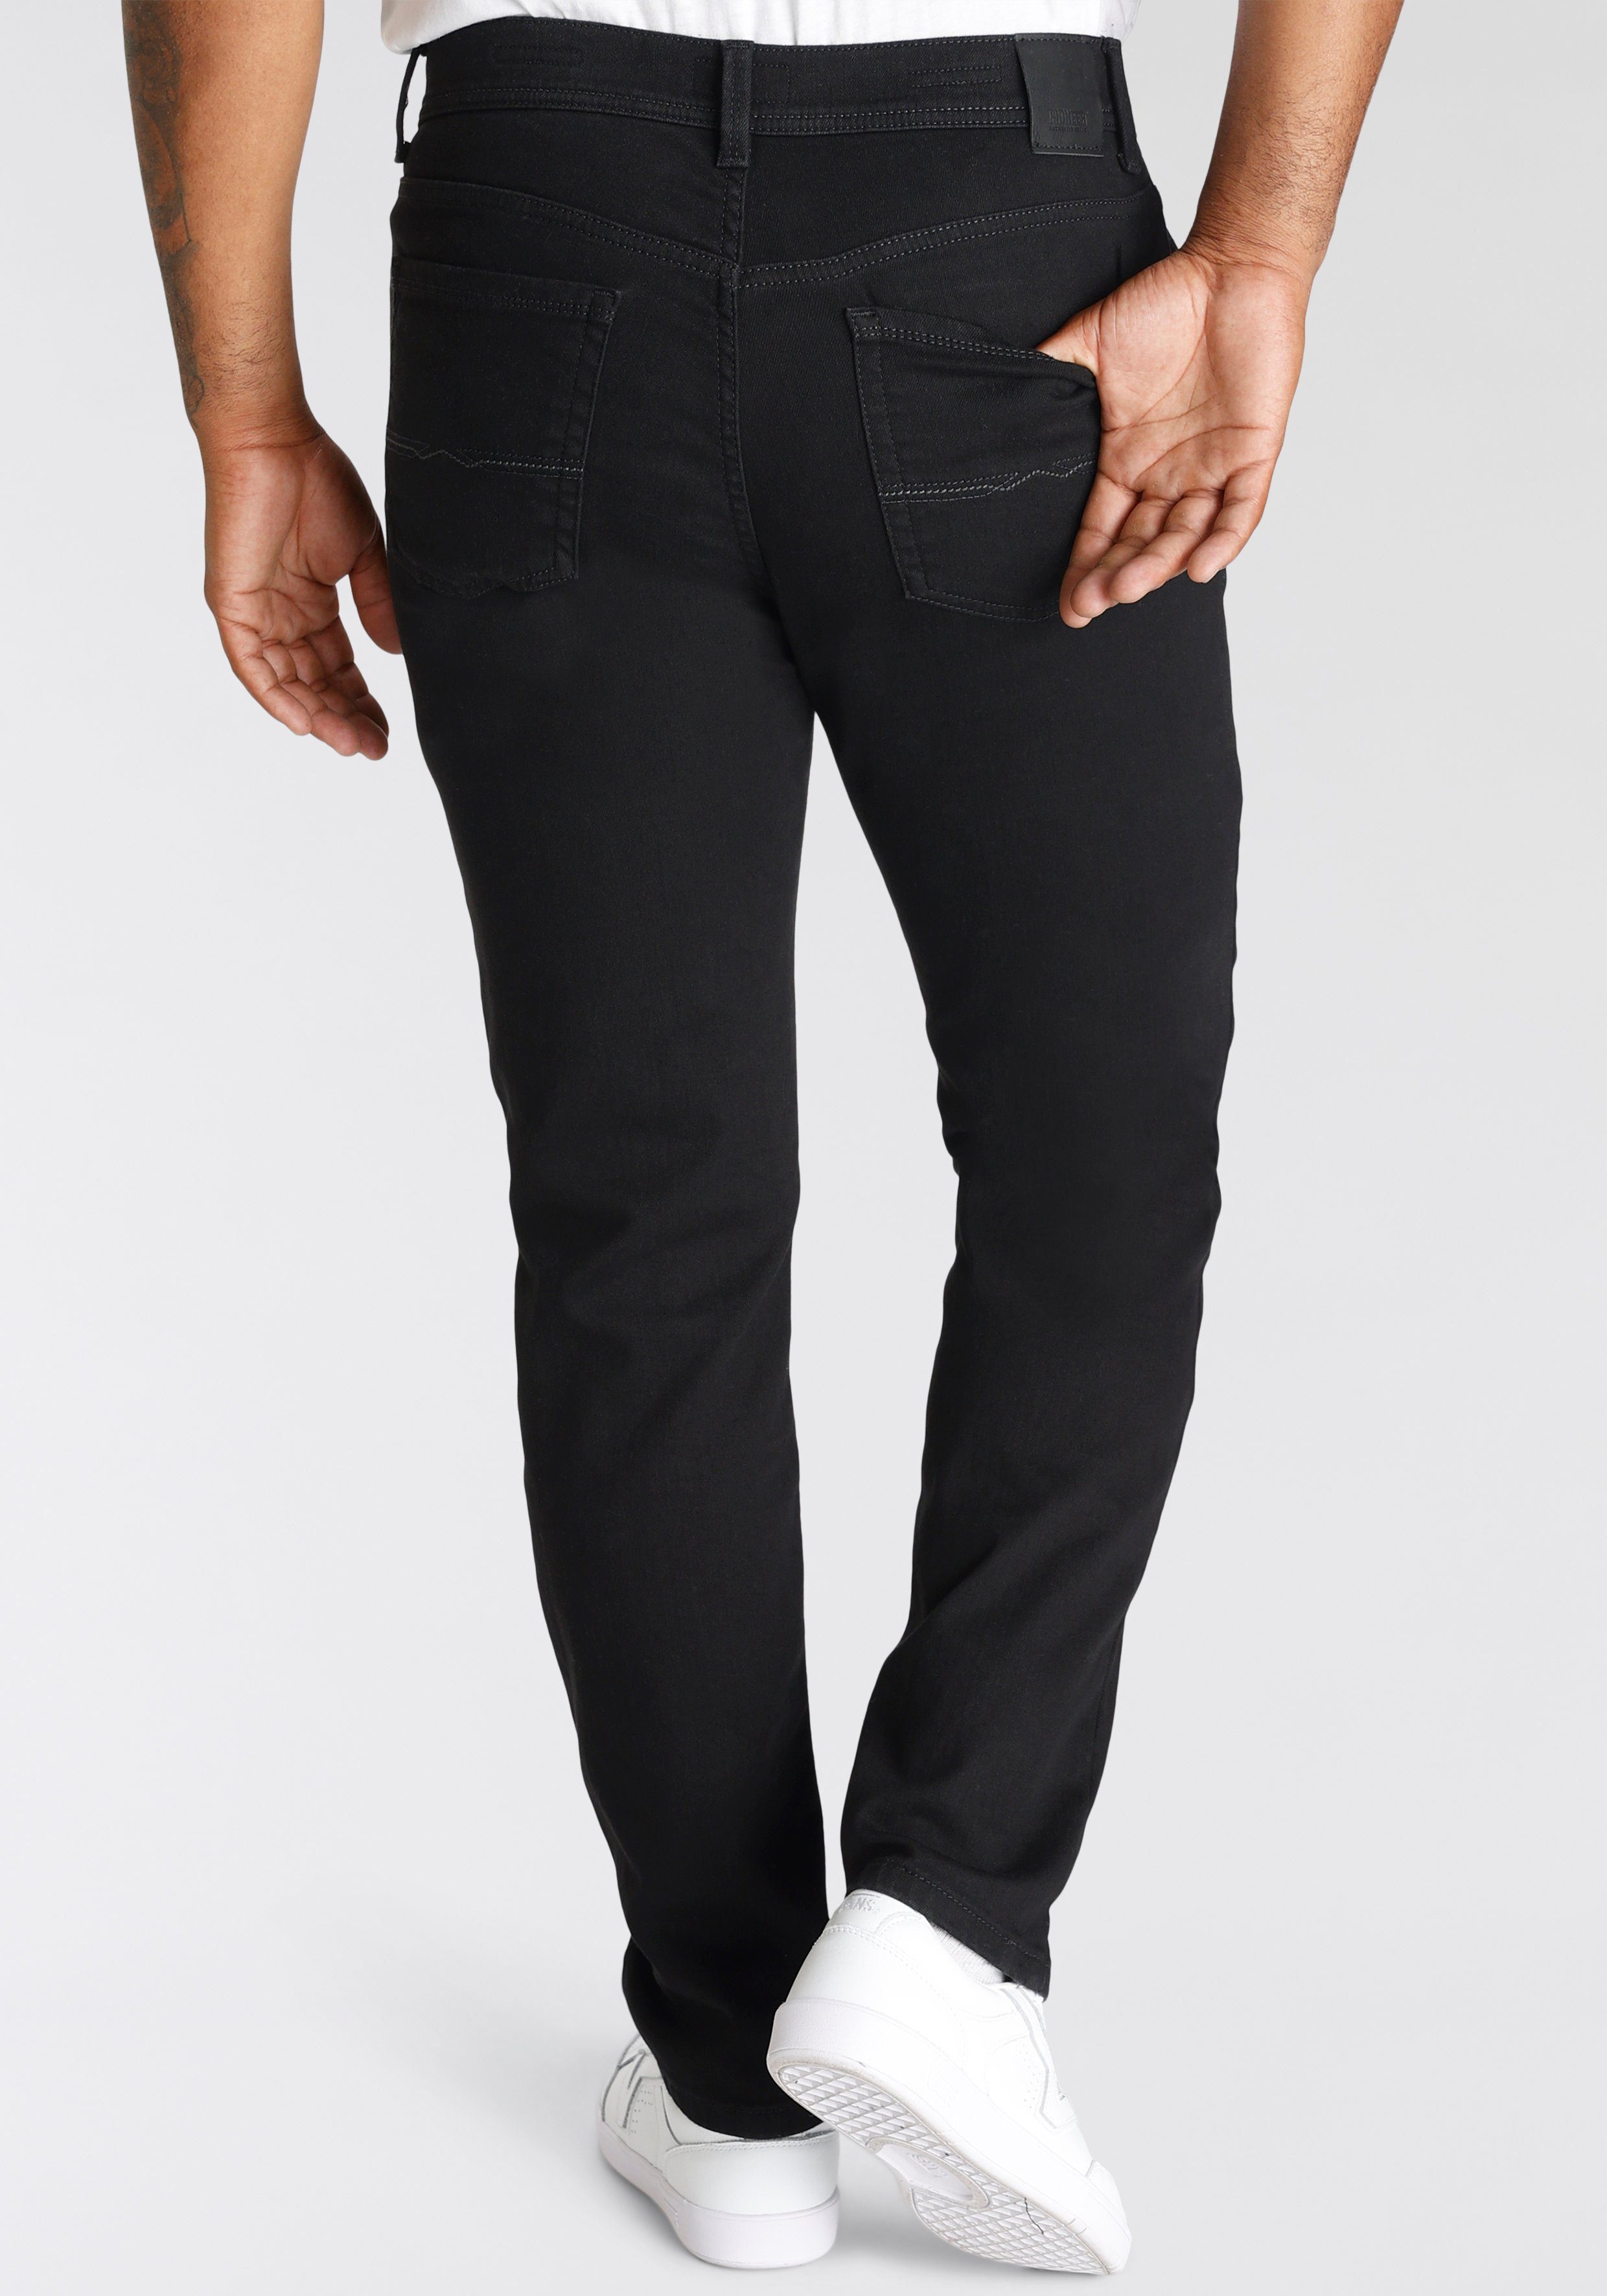 Pioneer Authentic Jeans Thermojeans Rando raw black black